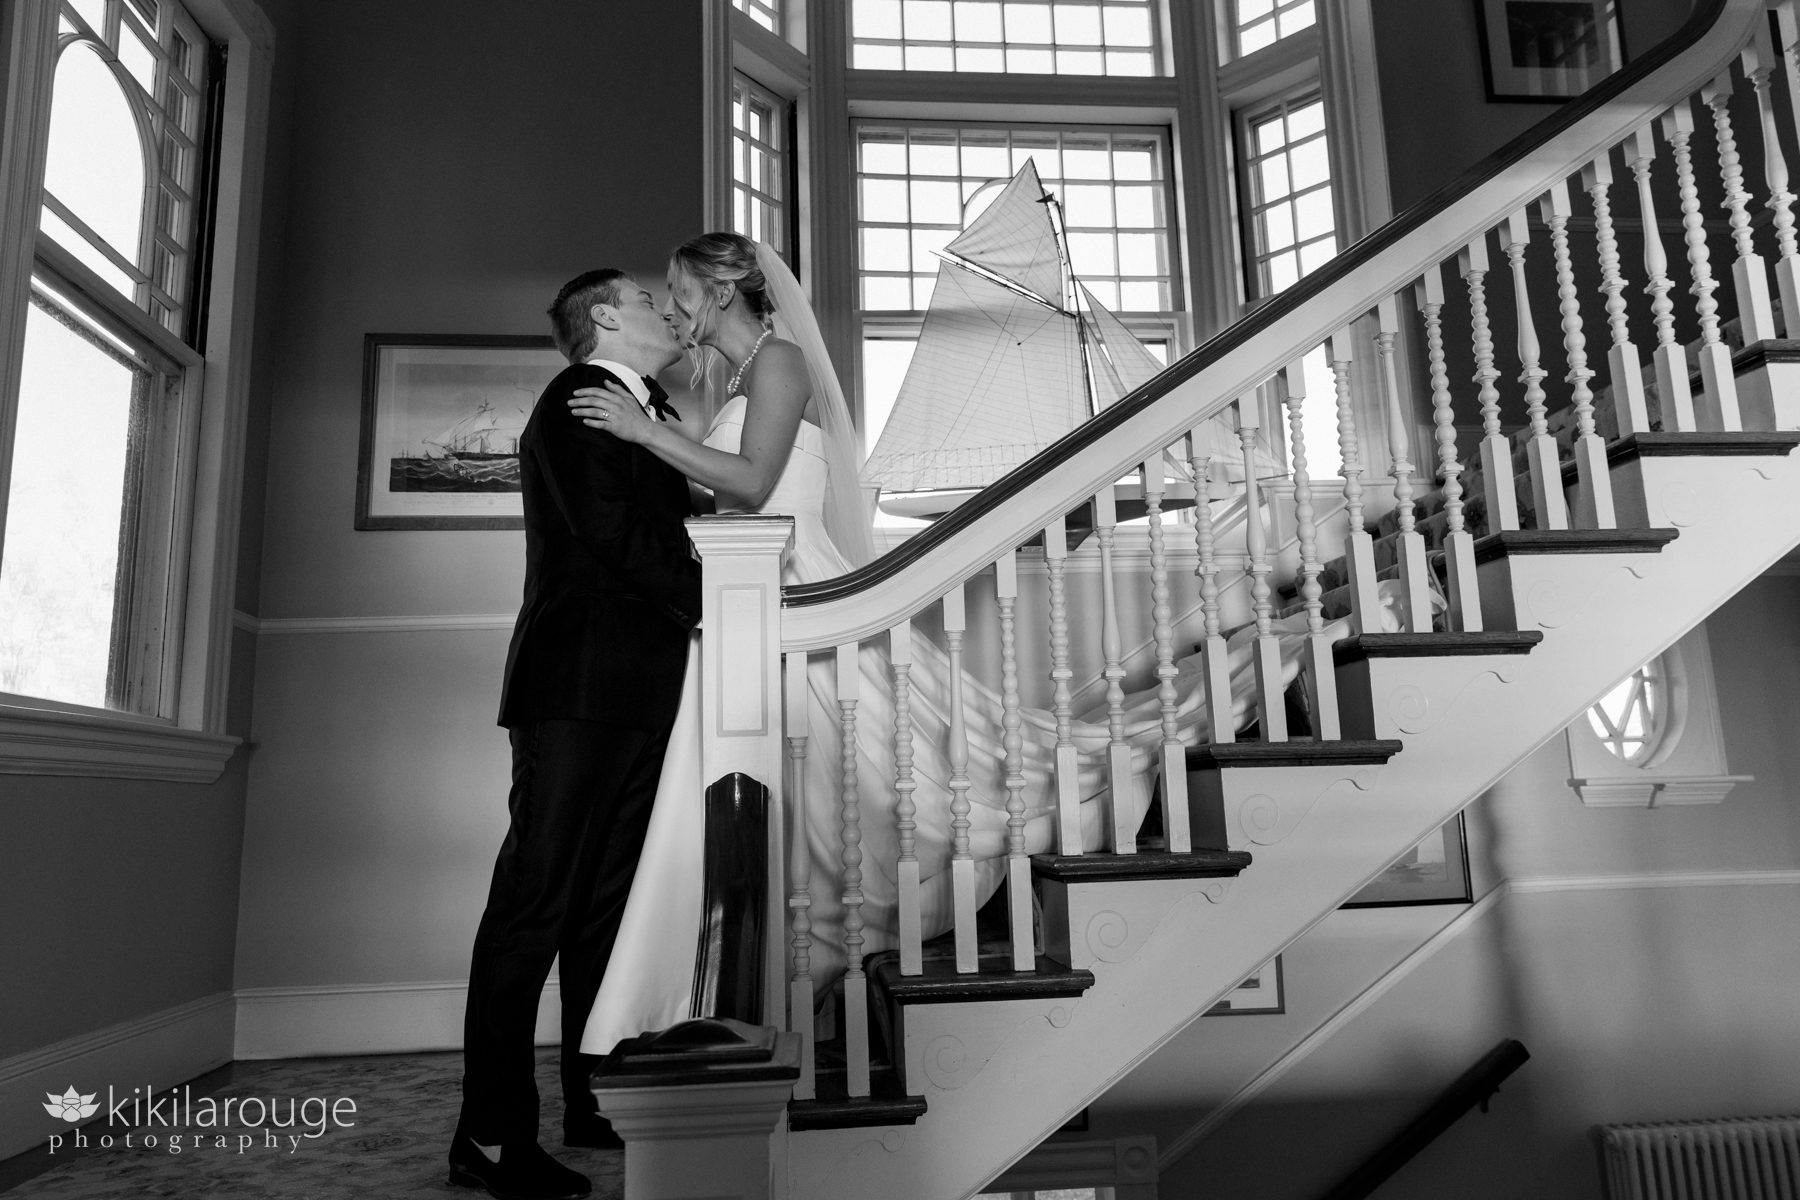 Wedding couple on stairs with long shadows and small sailboat replica in background